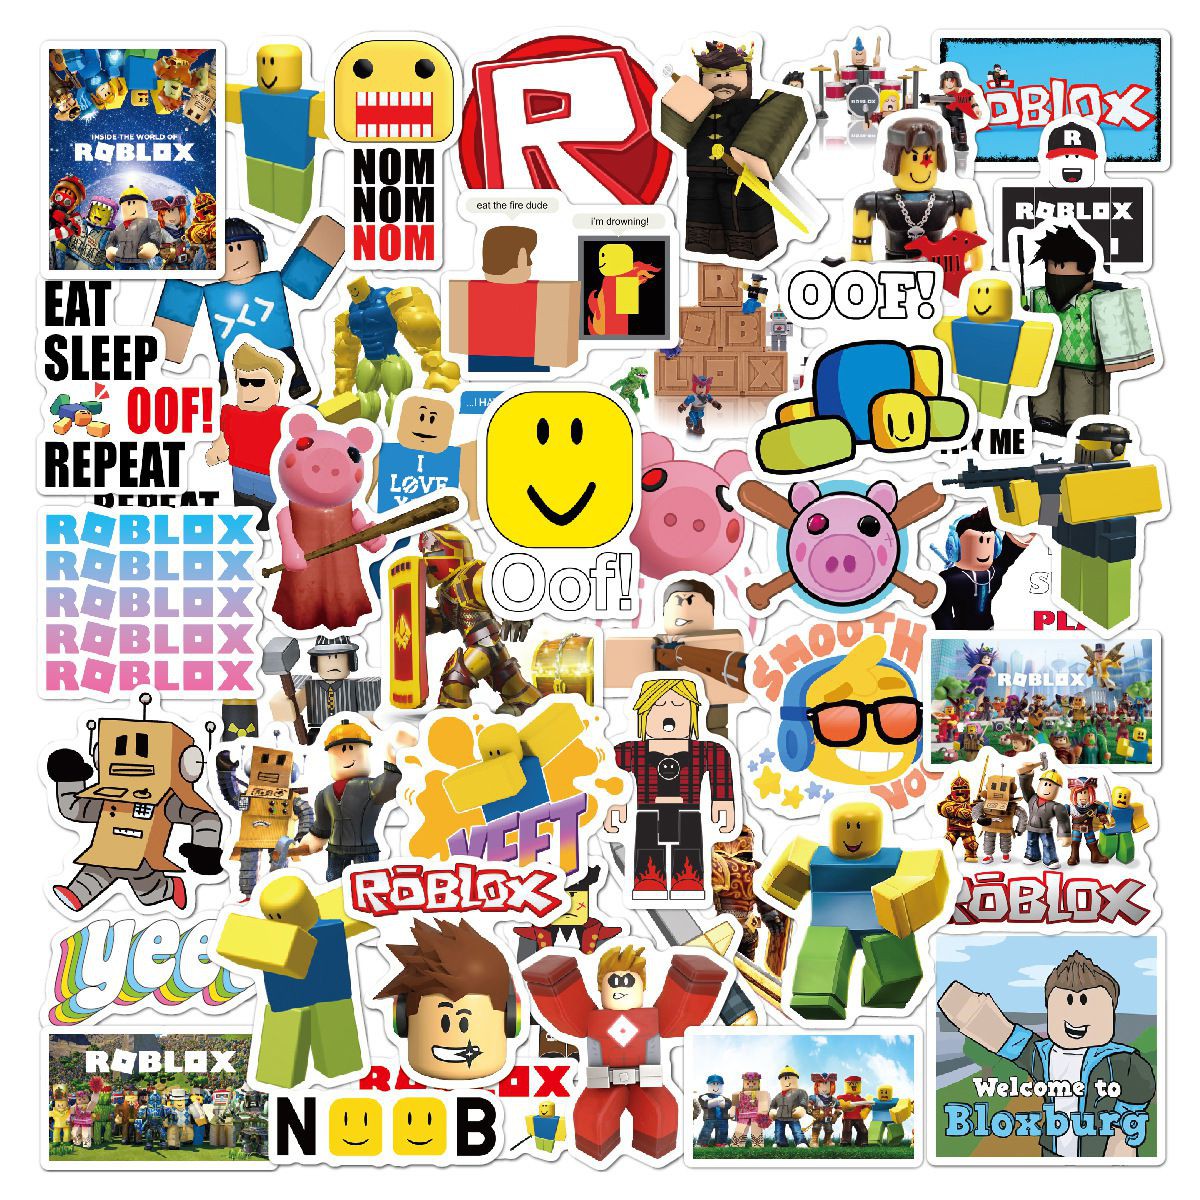 50pcs Game Roblox Stickers Waterproof Diy Laptop Skateboard Bike Luggage Decals Shopee Philippines - roblox money decal